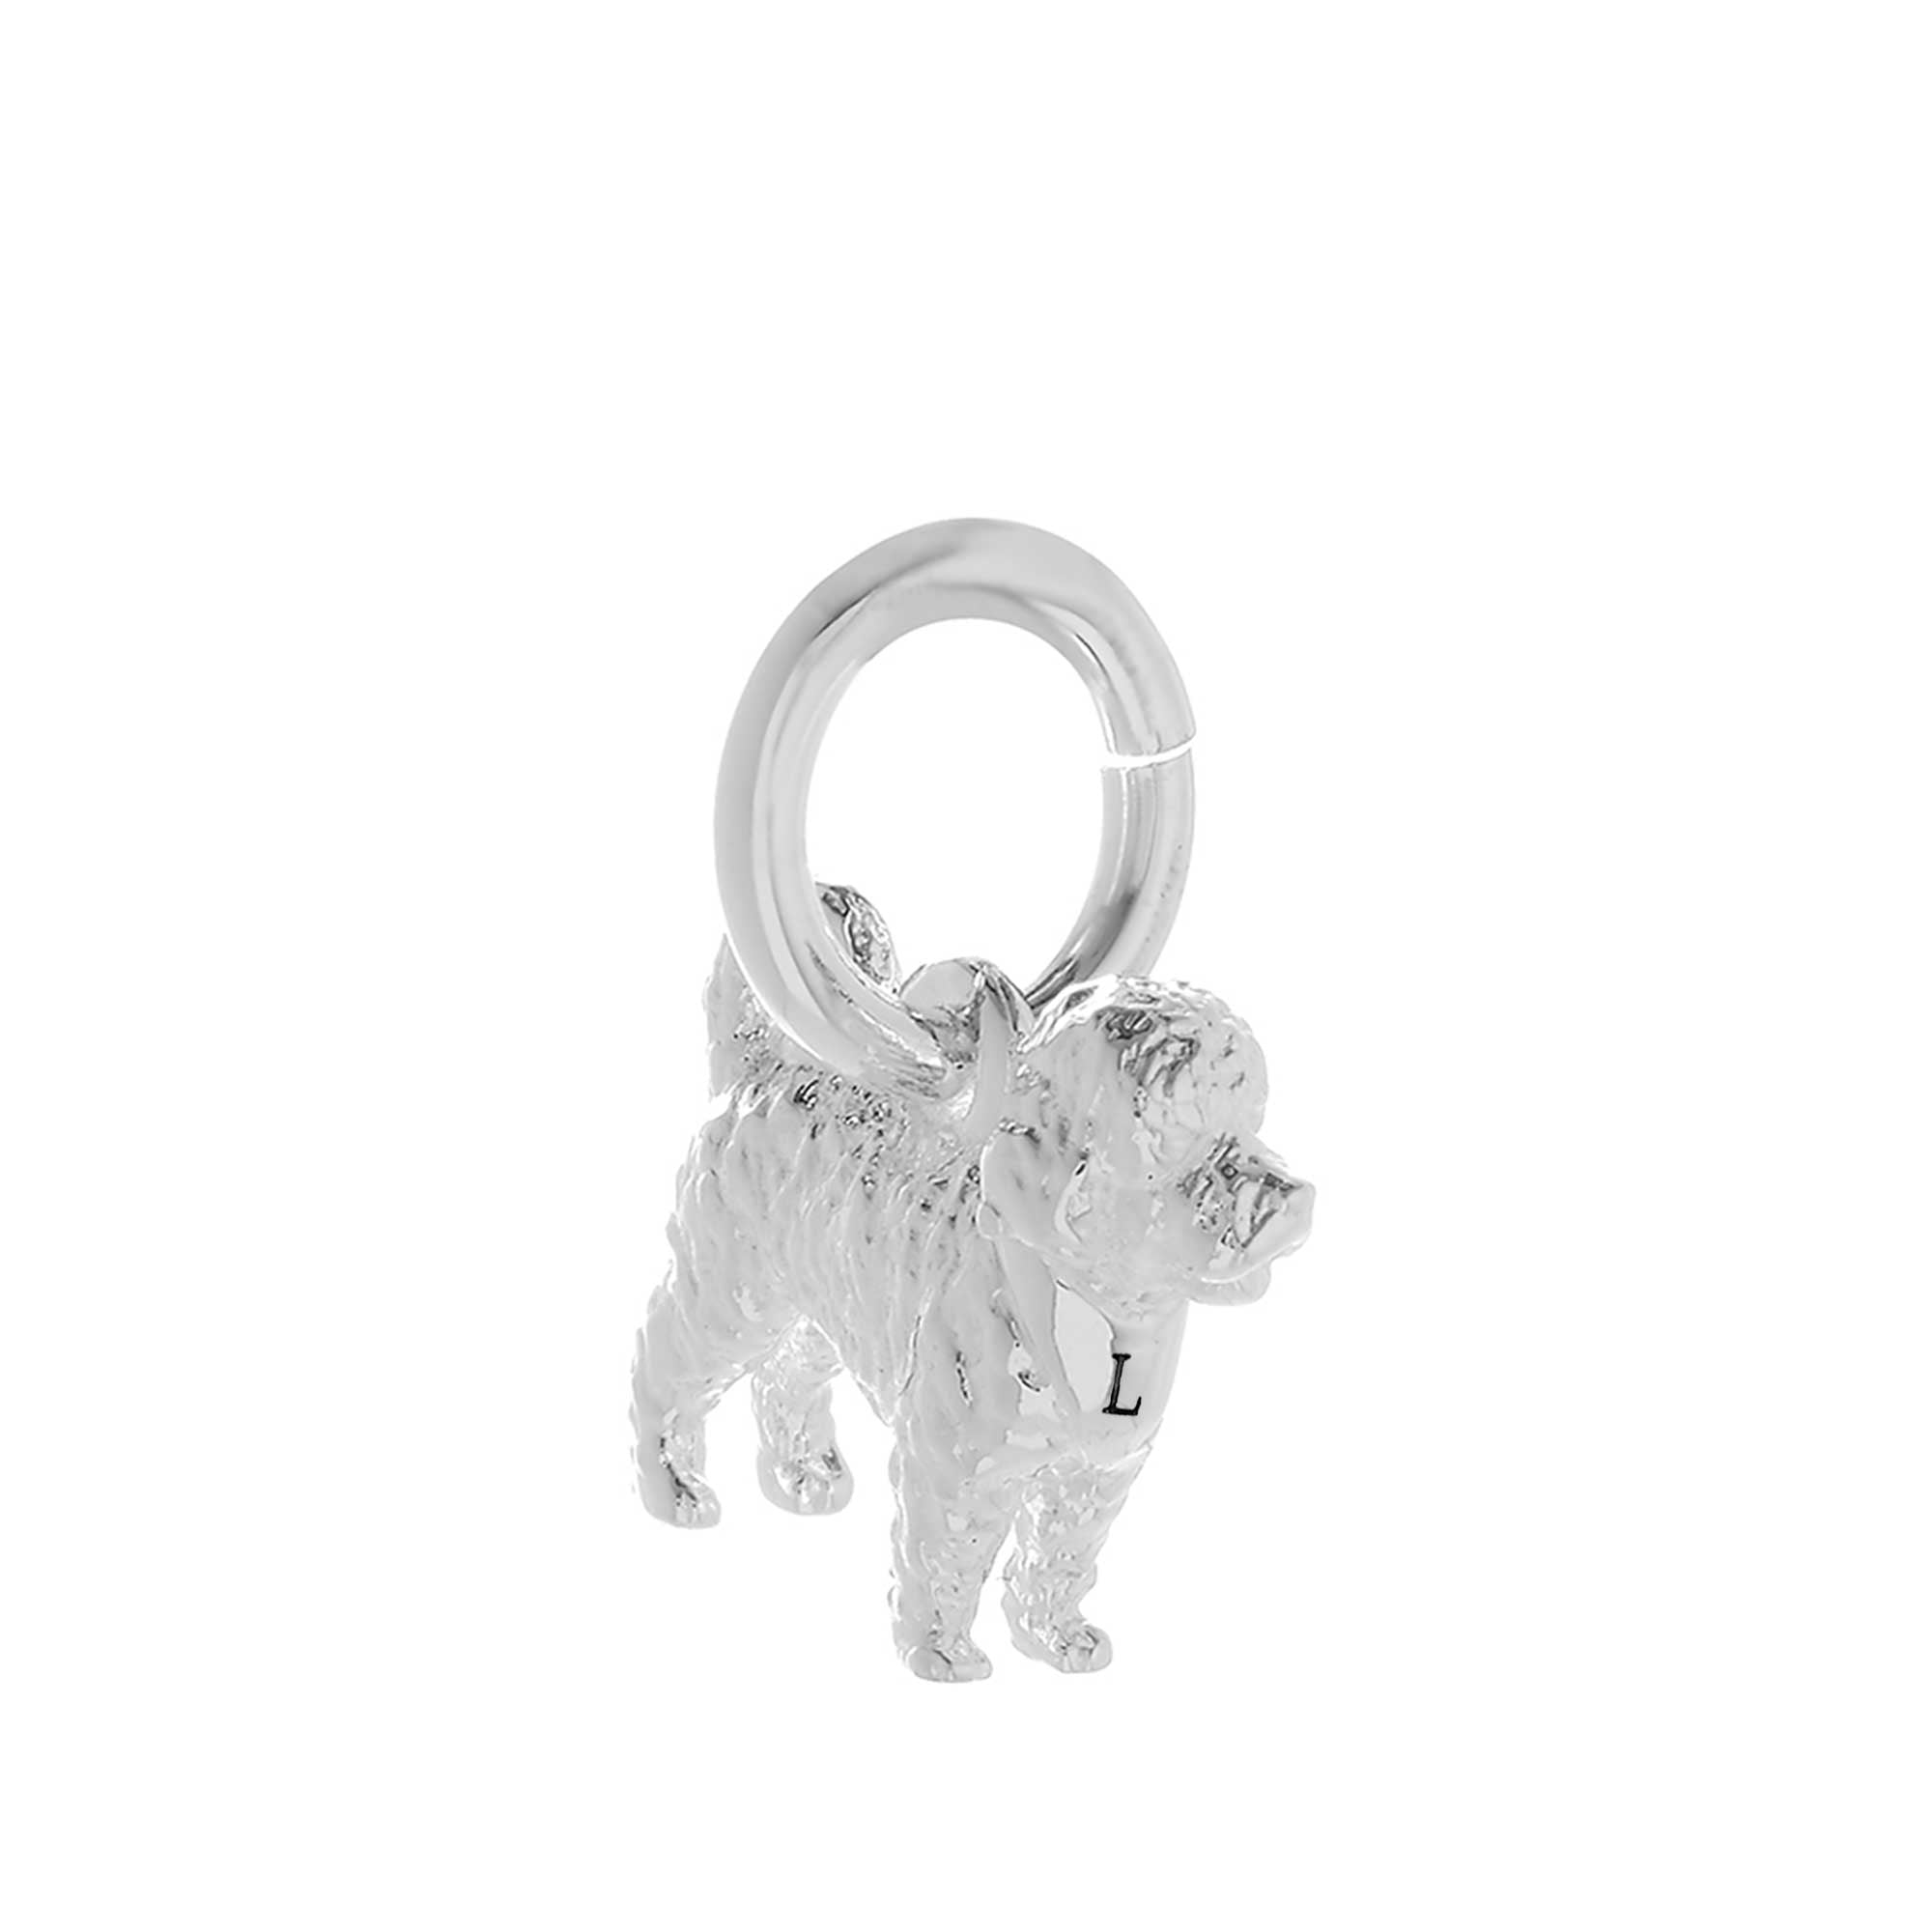 Cavapoo cavoodle mixed breed dog charm silver with jump ring for bracelet Scarlett Jewellery Ltd